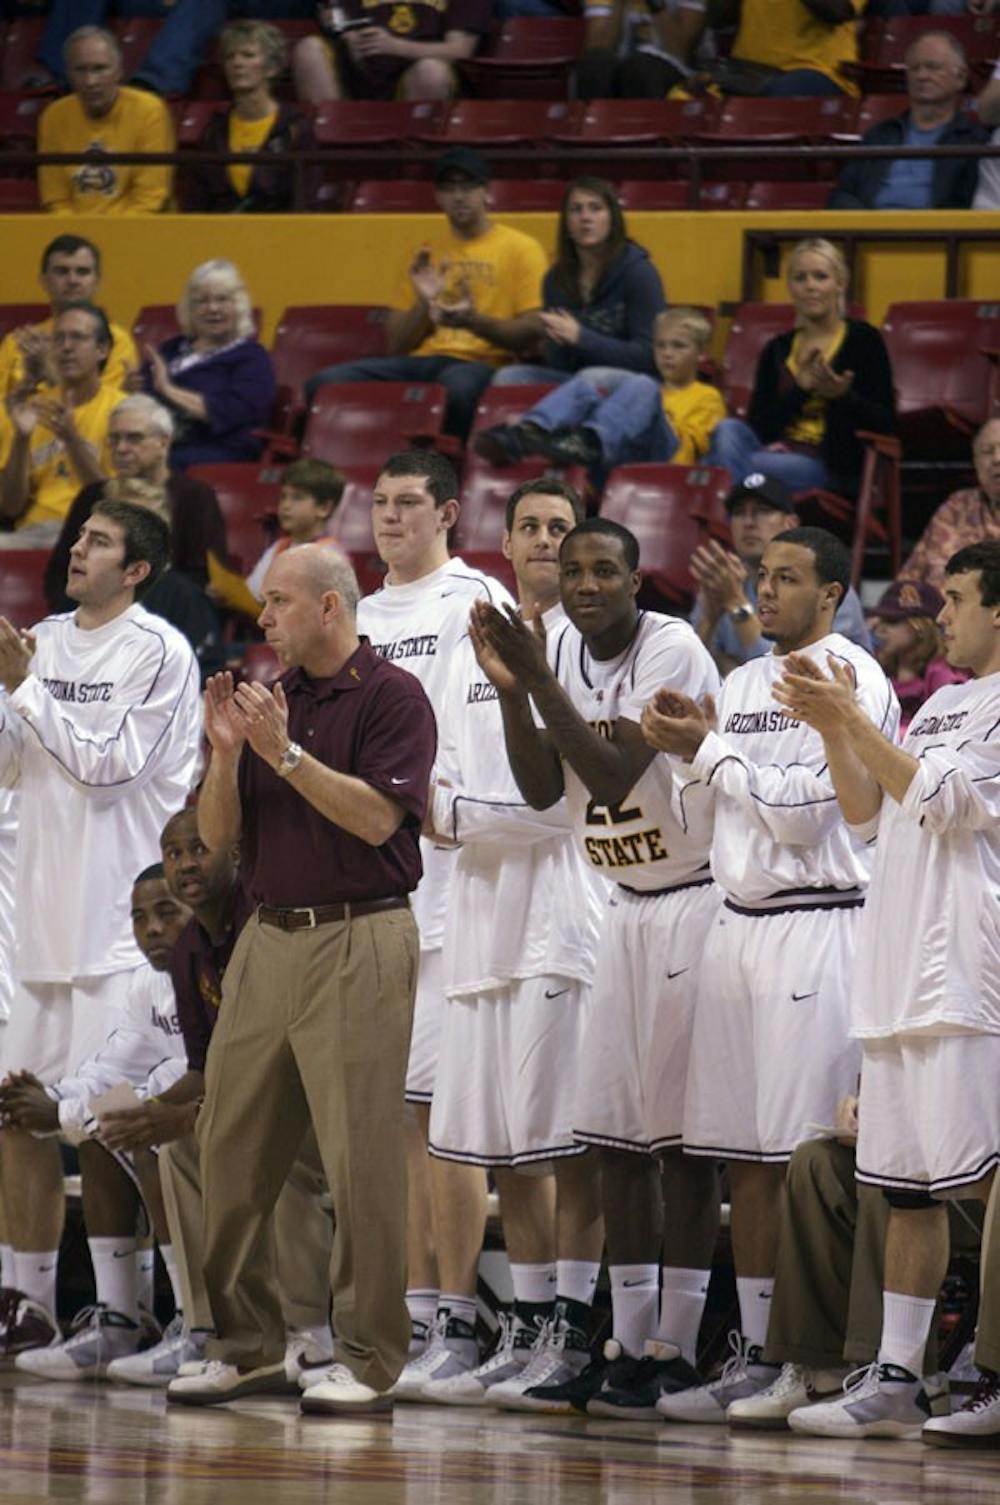 HANDS TOGETHER: Coach Herb Sendek and his players cheer on their team in one of ASU's many wins thing season. The Devil's finished their season with an overall record of 22-11. (Photo by Scott Stuk)